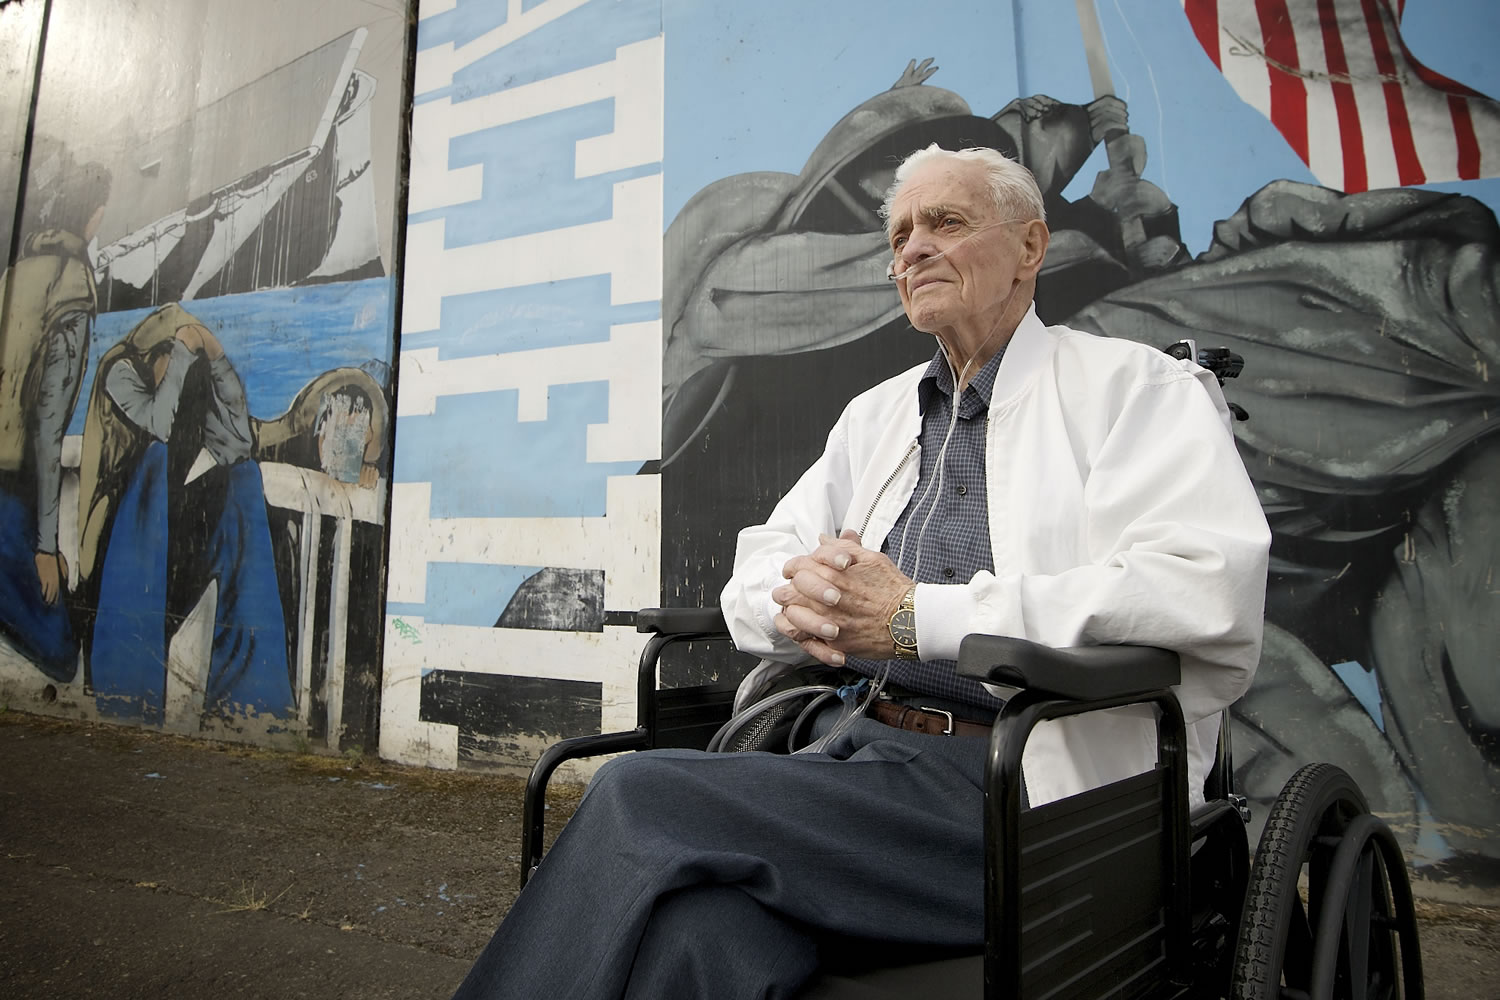 Hal Berven recalls being aboard the Vancouver-built USS Gambier Bay when it was sunk during the Battle of Leyte Gulf in 1944. The mural at the left shows the sinking of the USS St. Lo (which was launched on Aug.